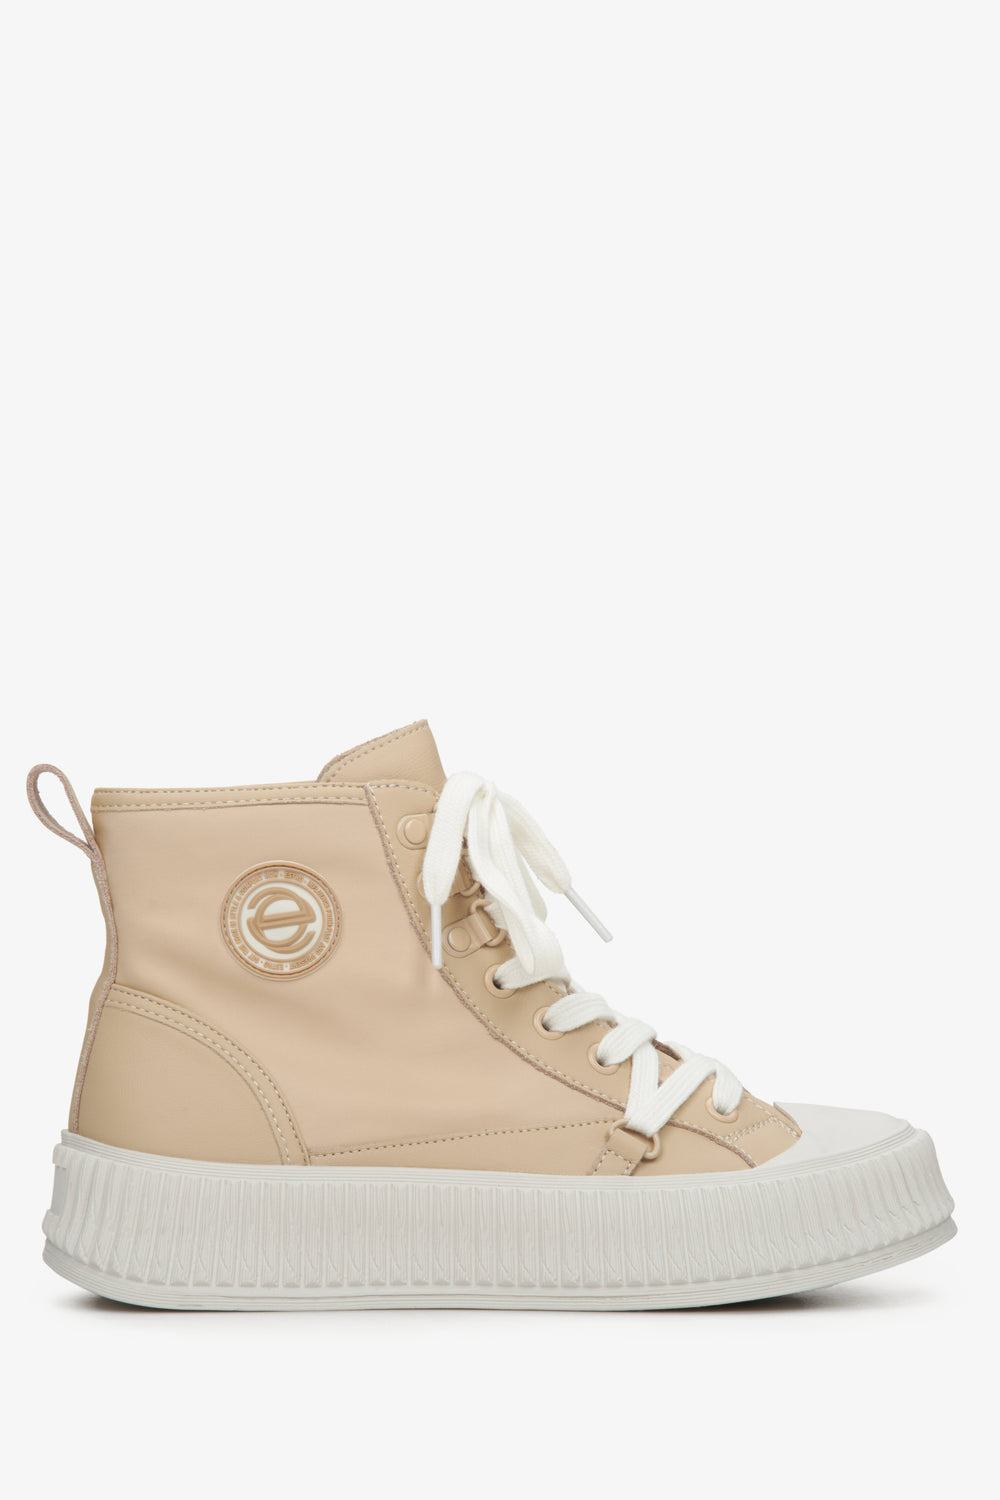 Women's Beige High-Top Sneakers made of Genuine Leather Estro ER00112708.